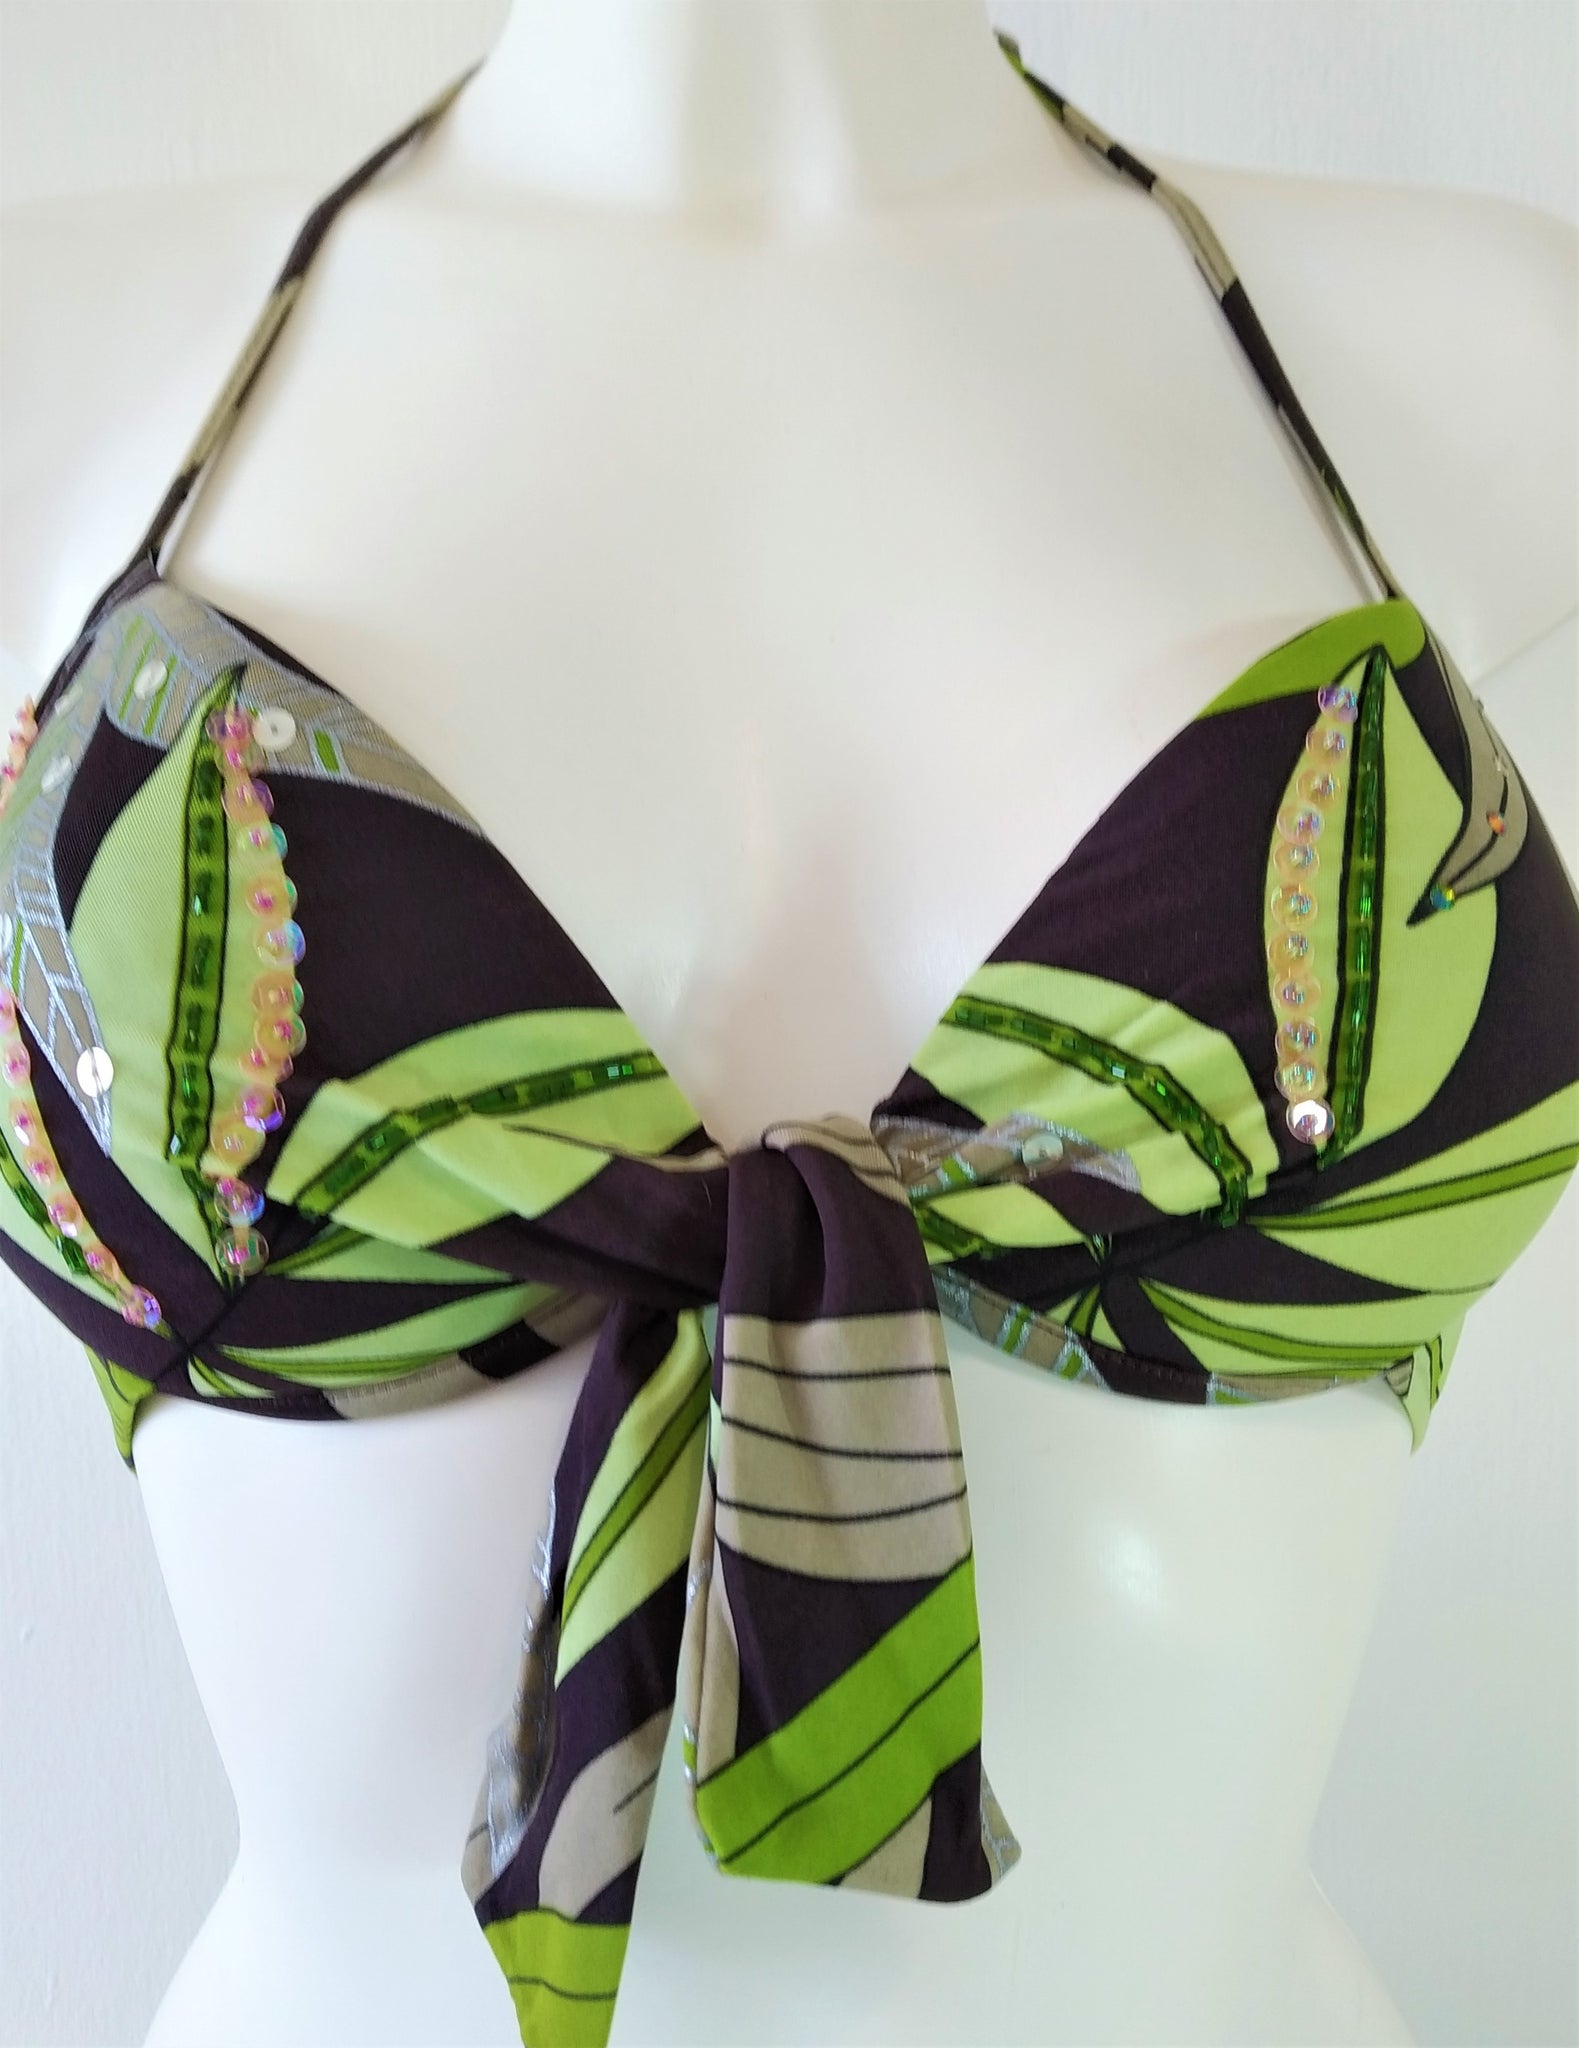 Bra of push-up bikini with print of  green leaves on brown background Embellishment: hand work of embroidered beads and sequins. bikinn.com  